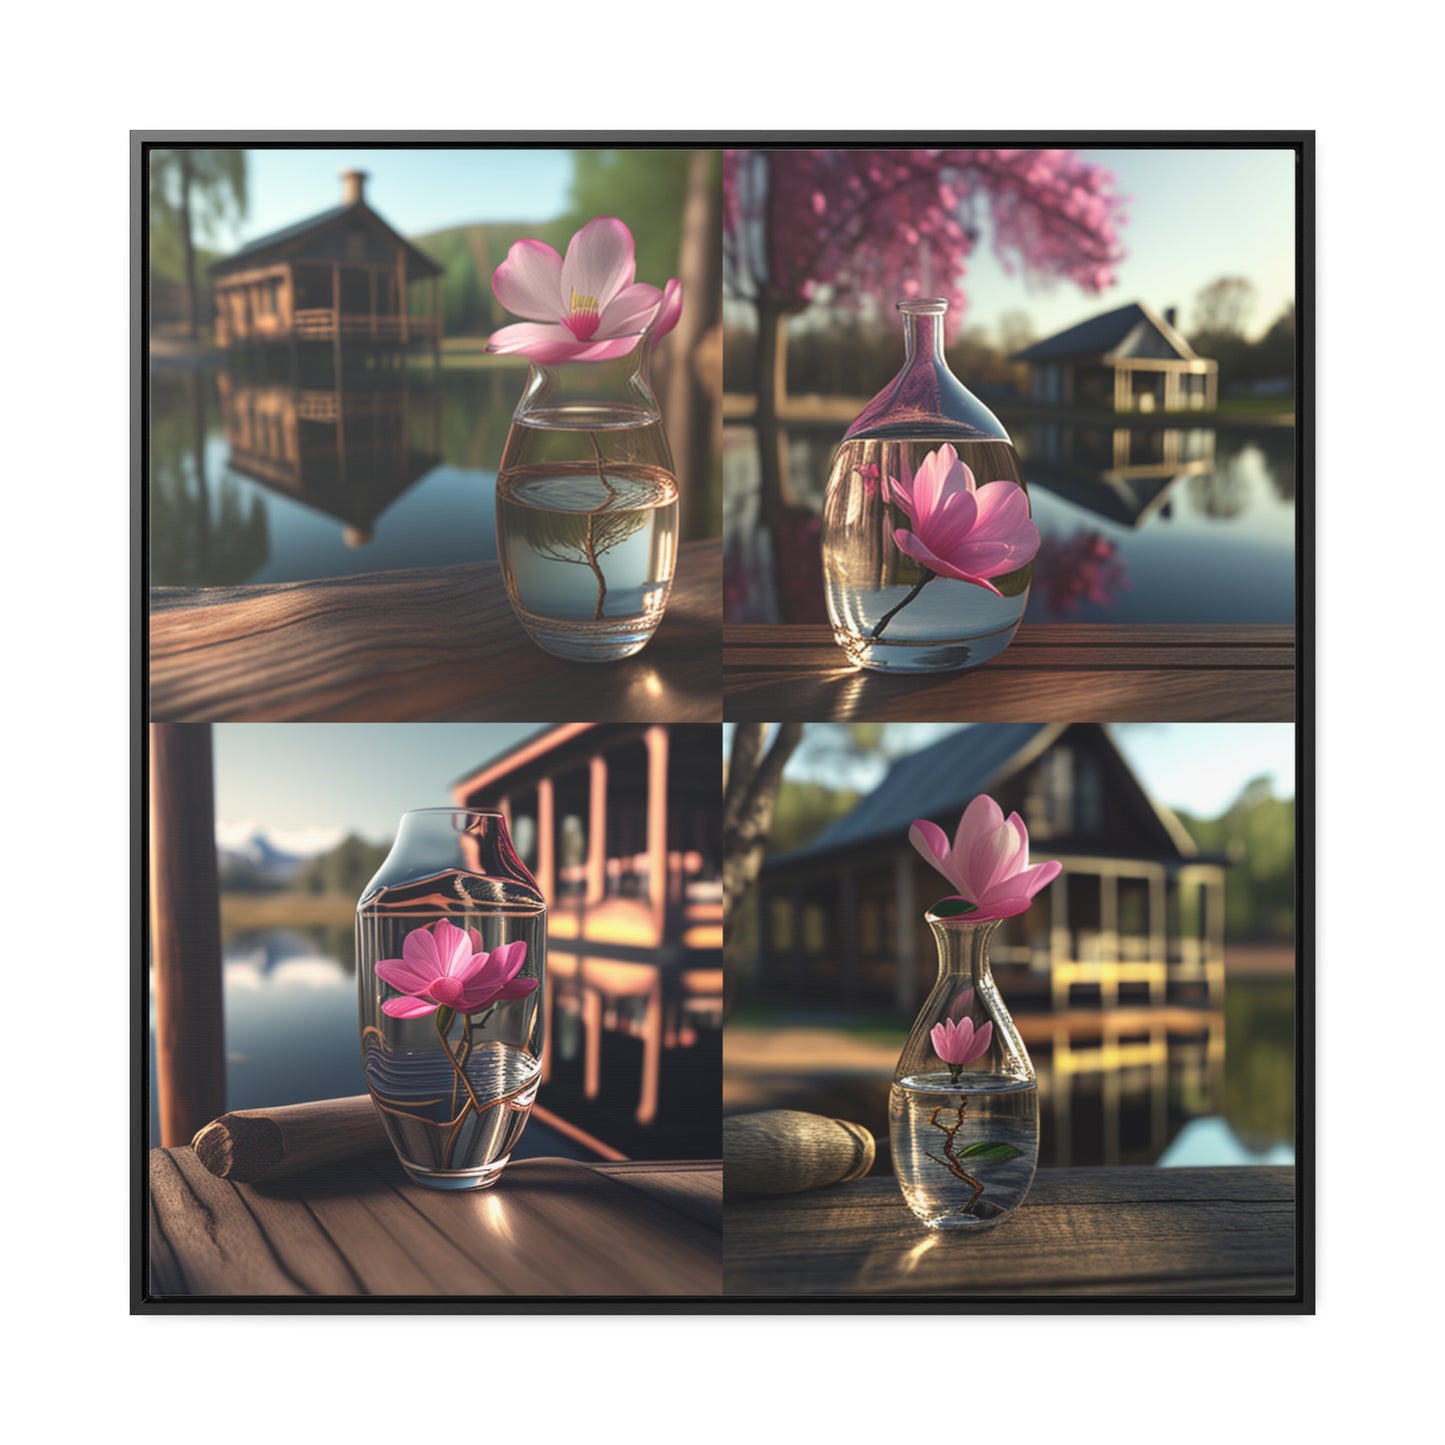 Gallery Canvas Wraps, Square Frame Magnolia in a Glass vase 5